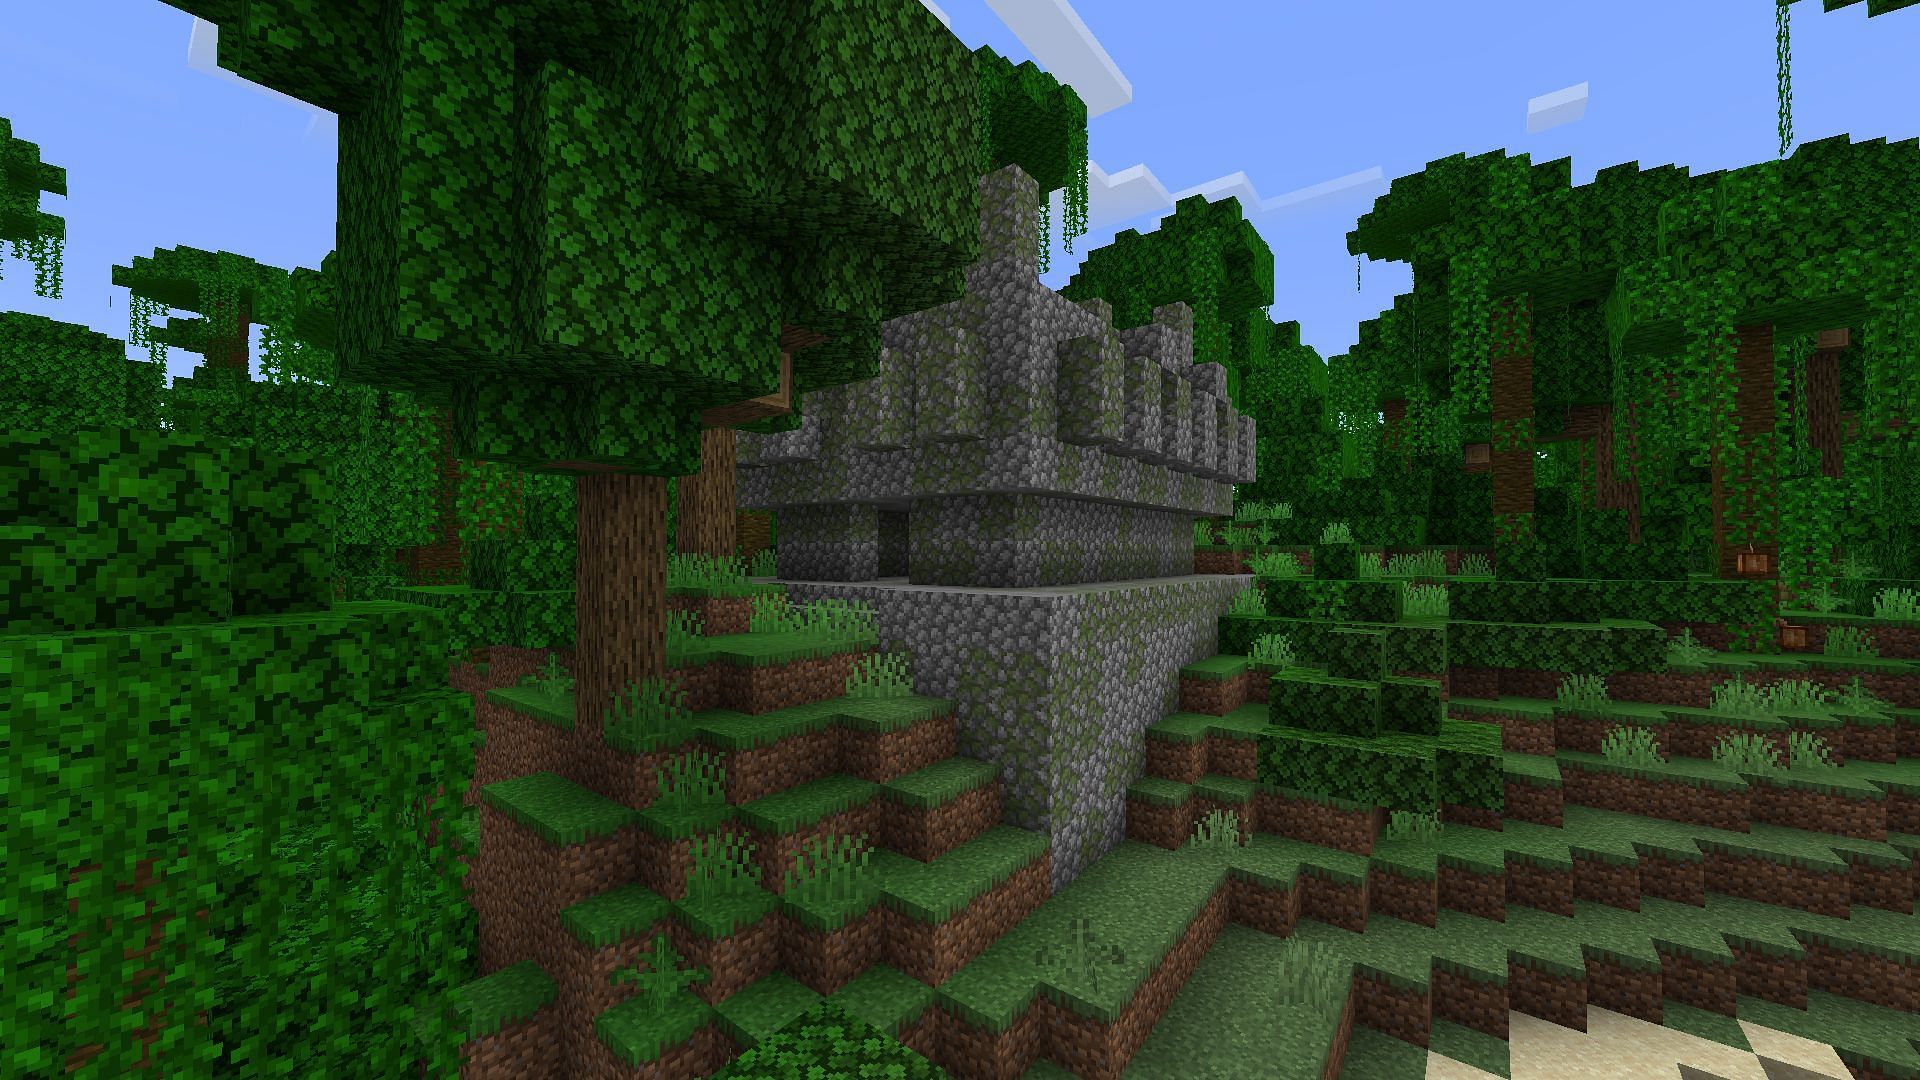 Jungle temples are normally hidden under more overgrowth (Image via Mojang)